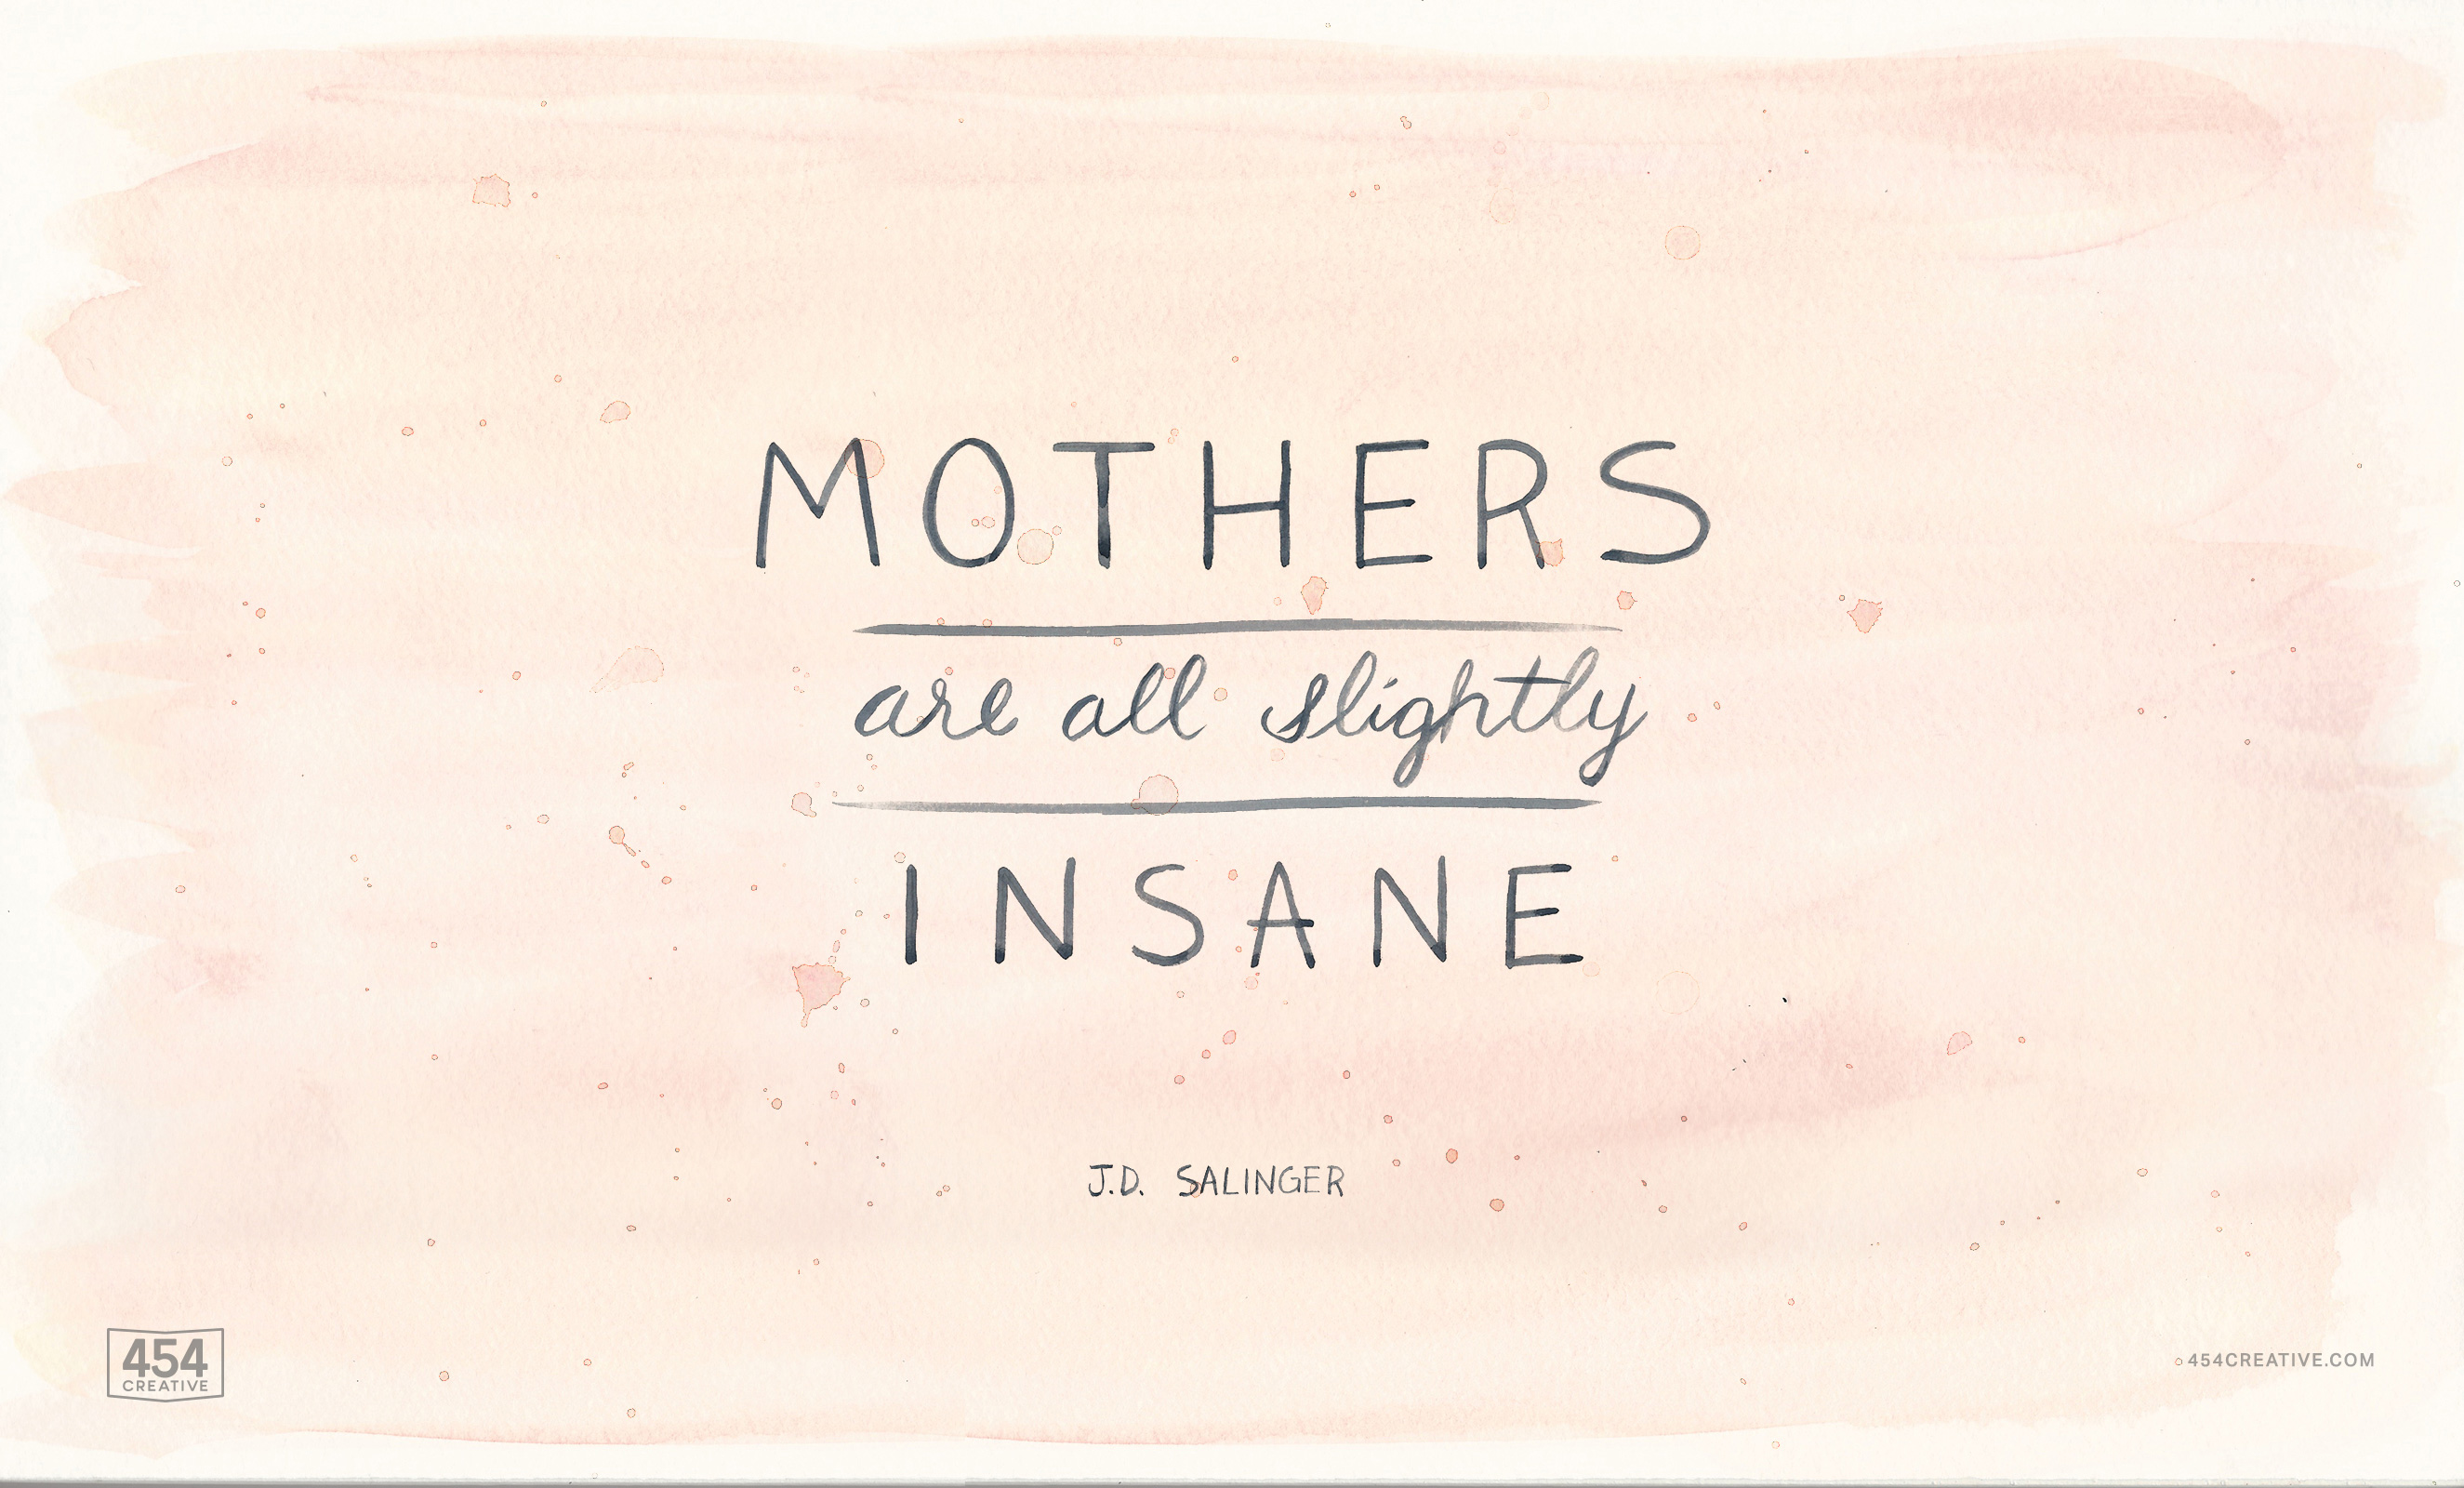 FREE Downloadable Mother's Day Mobile & Desktop Backgrounds | 454 Creative